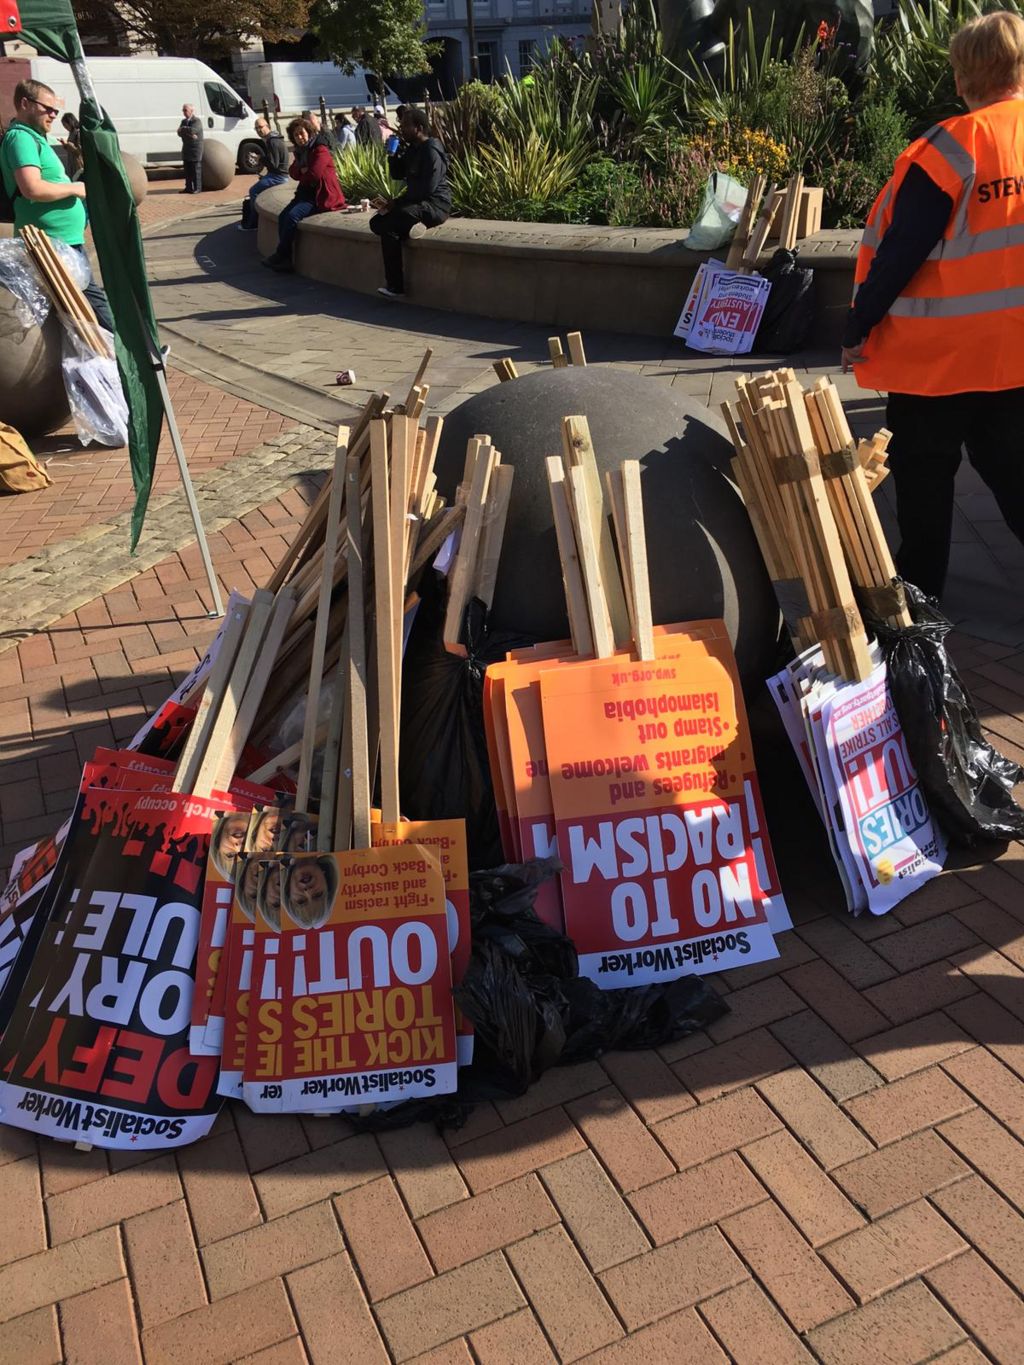 Placards lined up